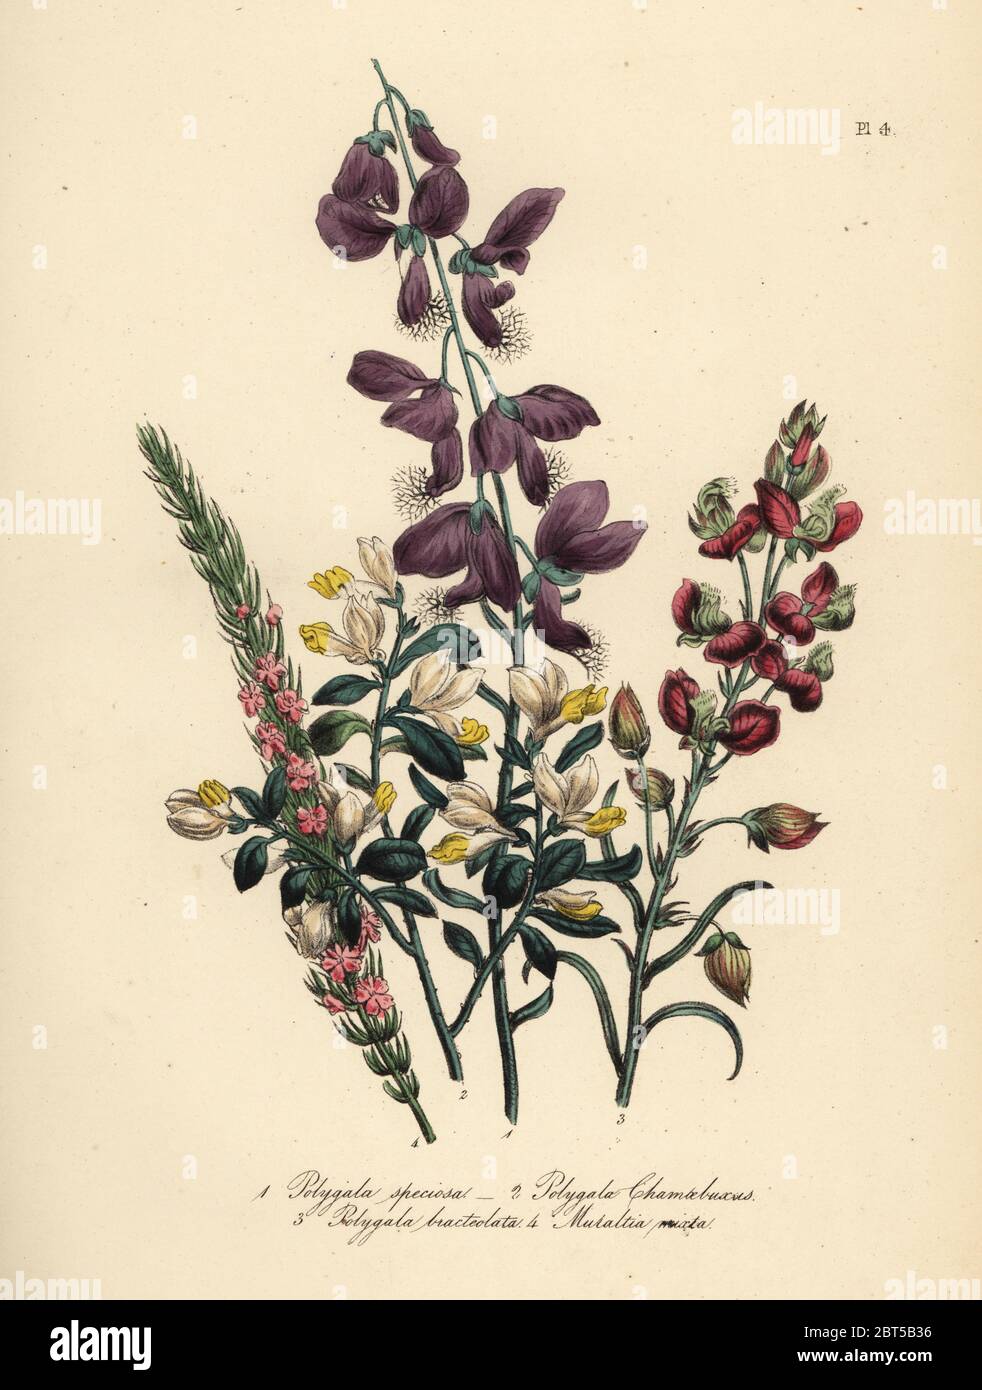 Showy polygala, Polygala speciosa, boxed-leaved milkwort, Polygala chamaebuxus, large-bracted milkwort, Polygala bracteola, and heath-leaved milkwort, Muraltia mixta. Handfinished chromolithograph by Noel Humphreys after an illustration by Jane Loudon from Mrs. Jane Loudon's Ladies Flower Garden or Ornamental Greenhouse Plants, William S. Orr, London, 1849. Stock Photo